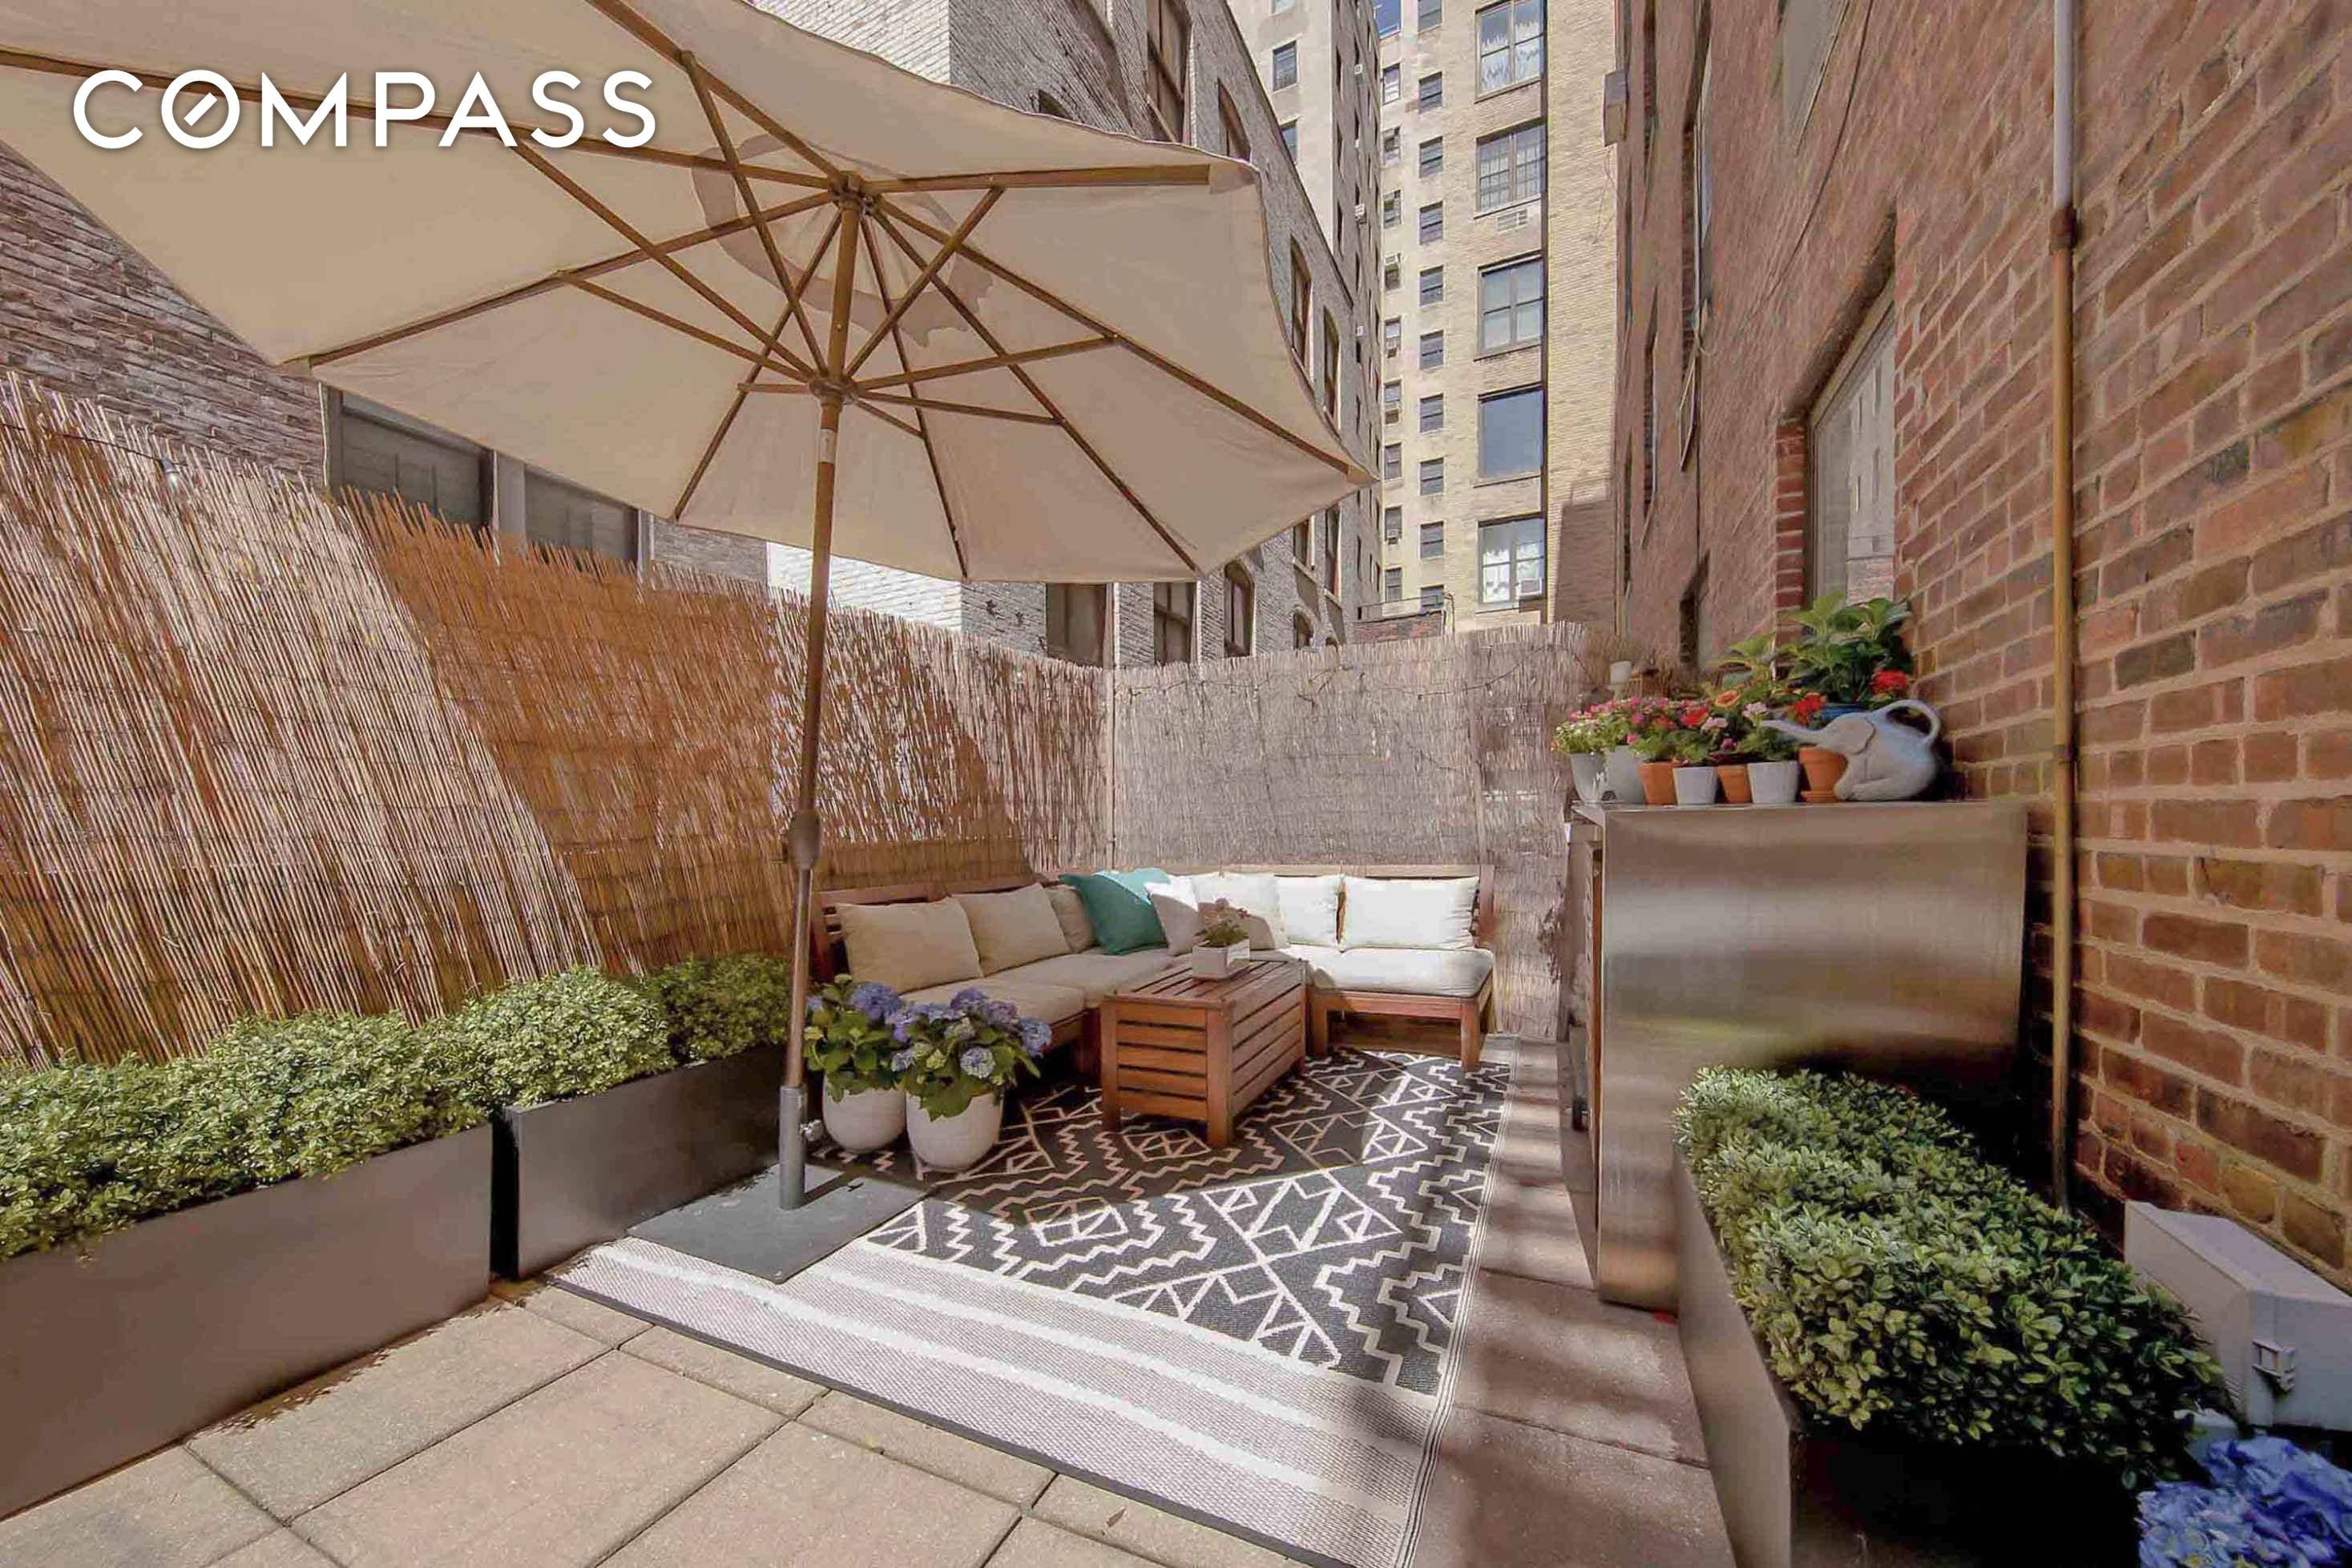 3BR, Terrace, Location ! Live in the heart of the UES with private outdoor space walking distance from everything you need Central Park, Schools, Museums and restaurants.